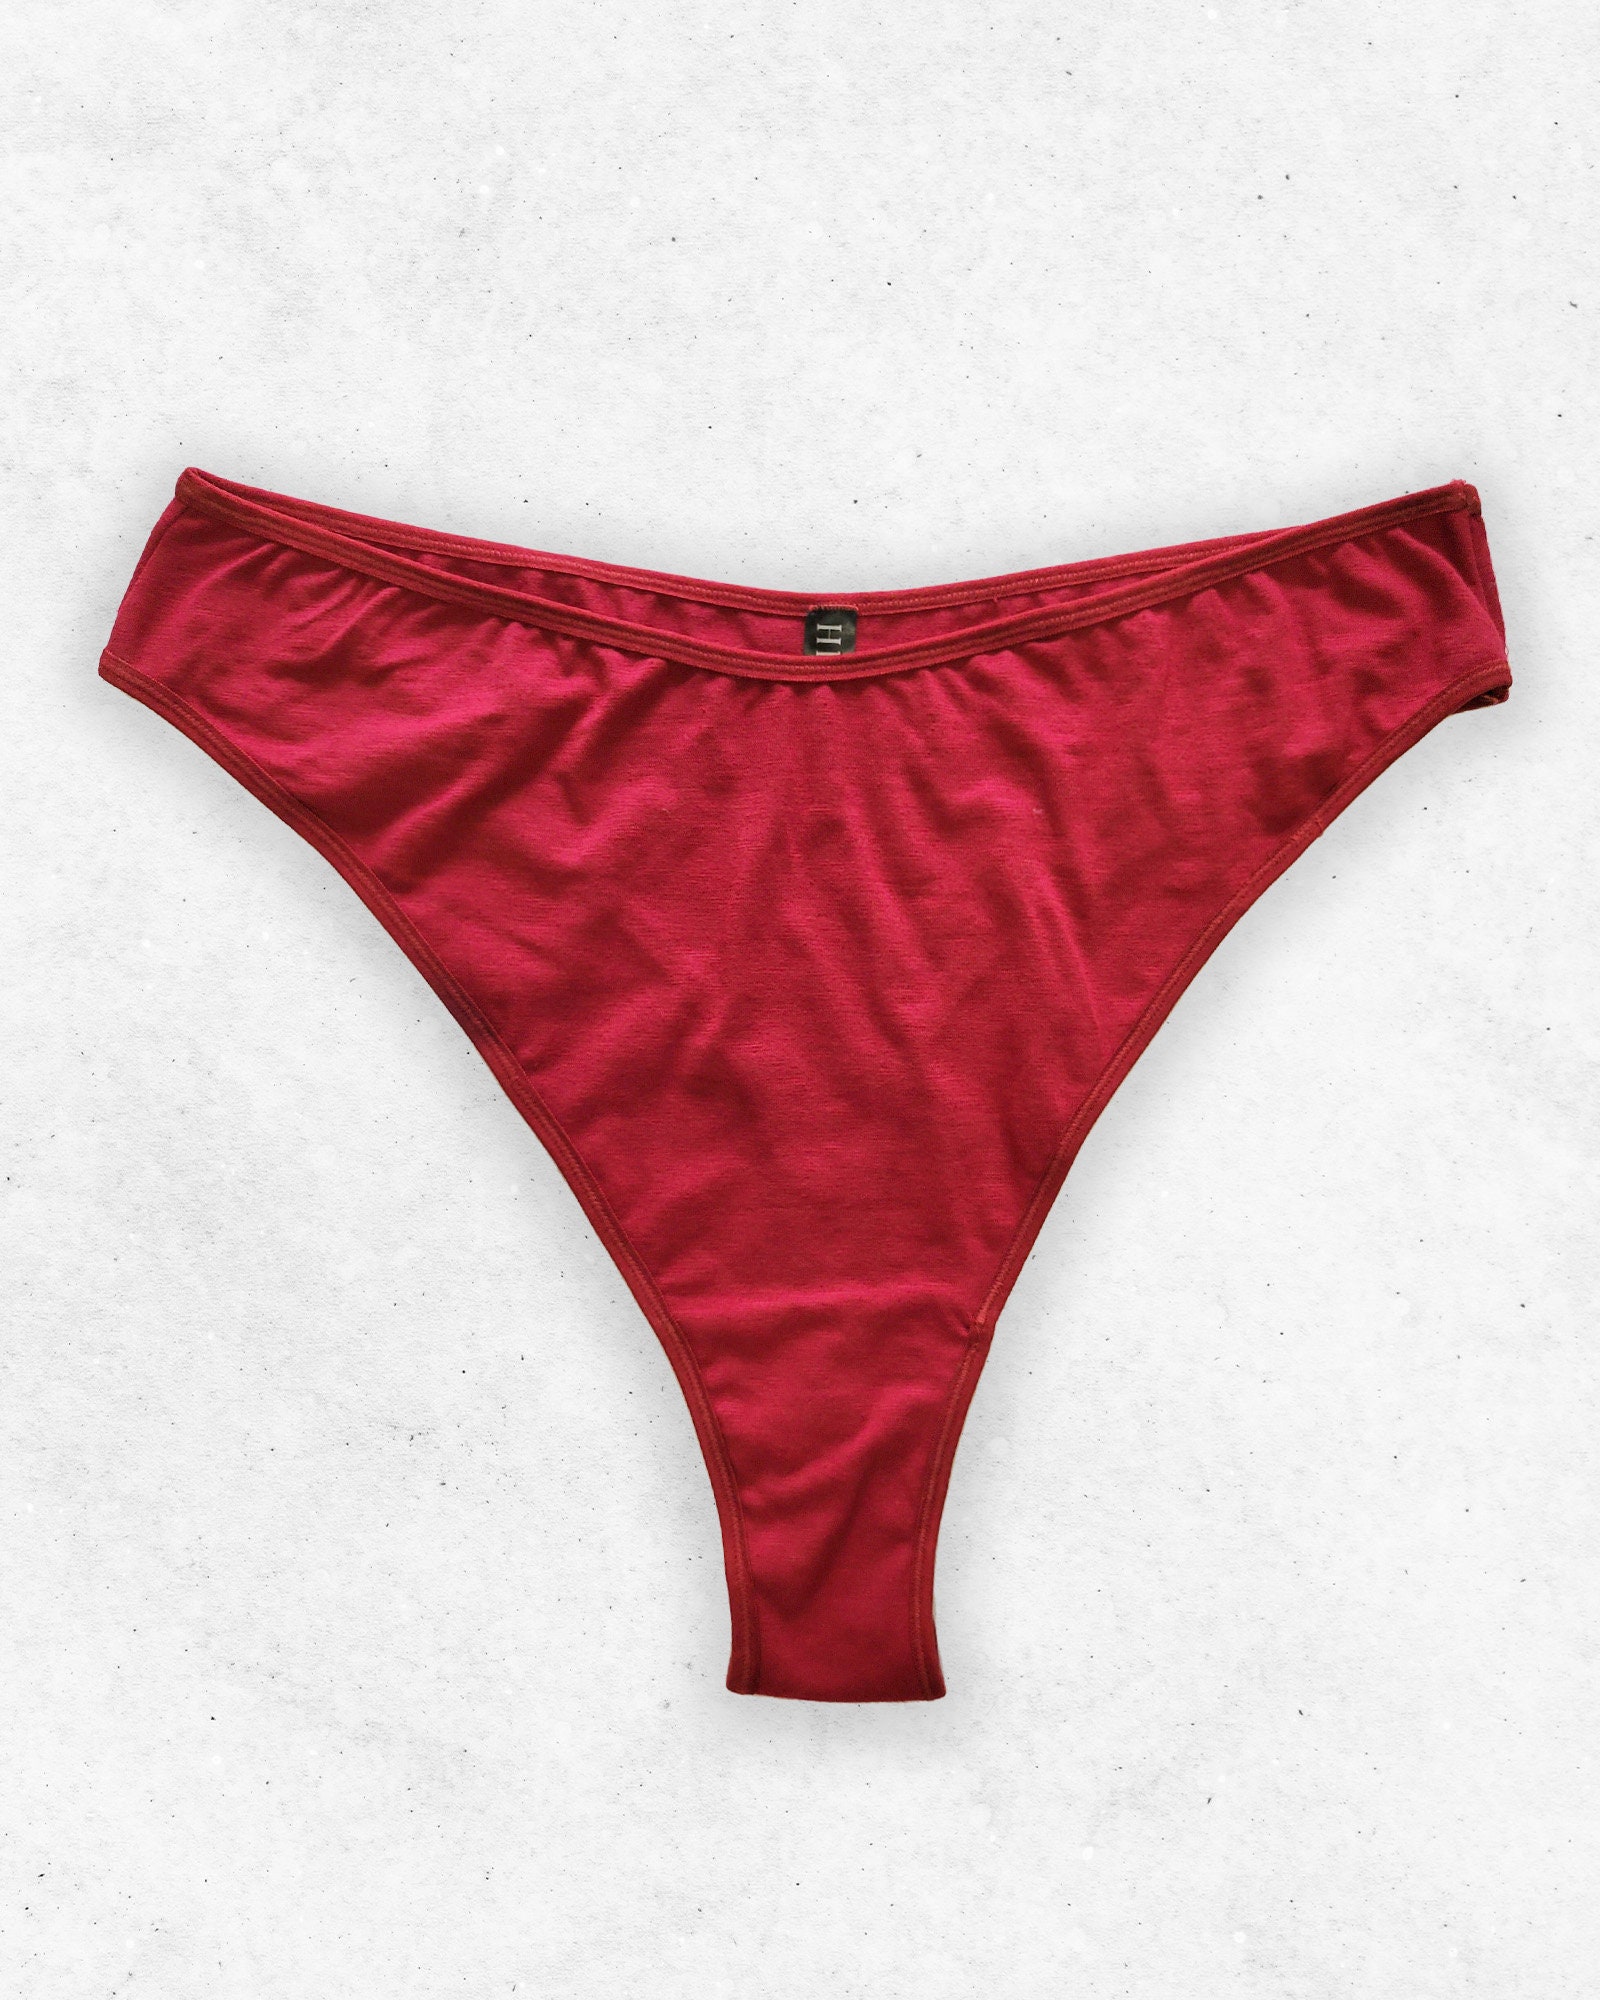 Plus Size Underwear High-waisted, High-leg Red Bamboo Cotton Thong